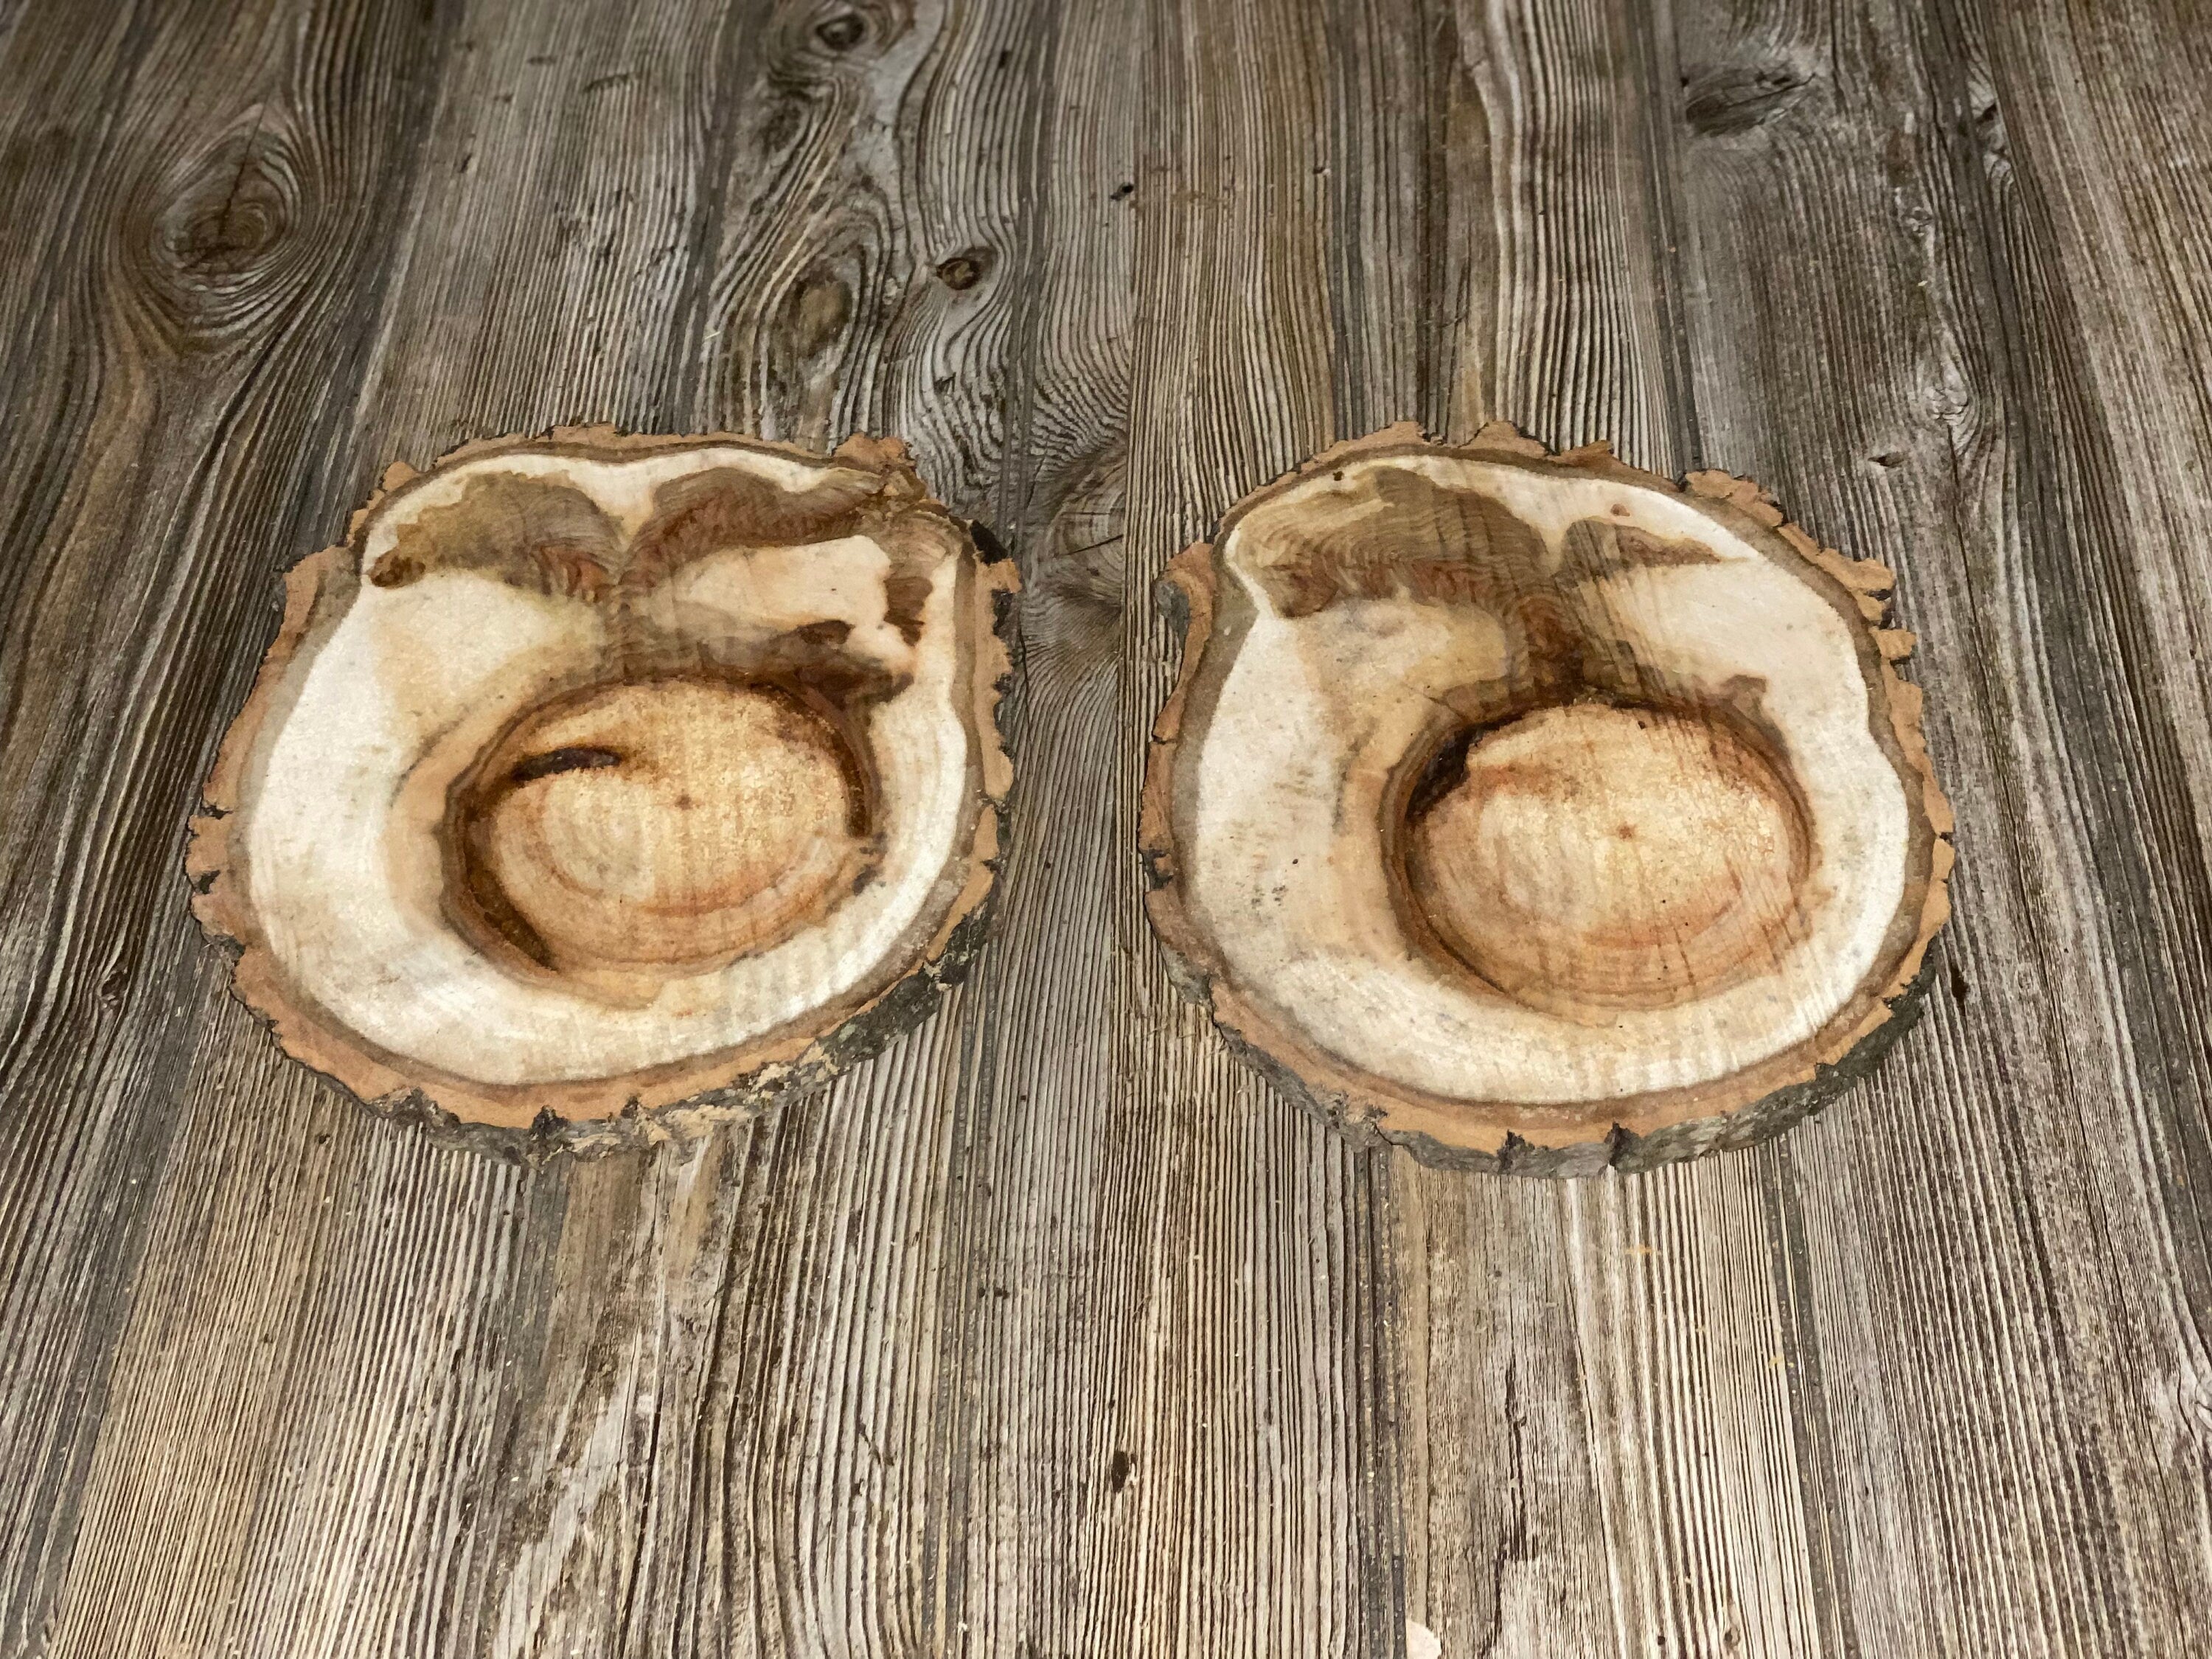 Two Aspen Burl Slices, Approximately 10 Inches Long by 8.5 Inches Wide and 3/4 Inches Thick